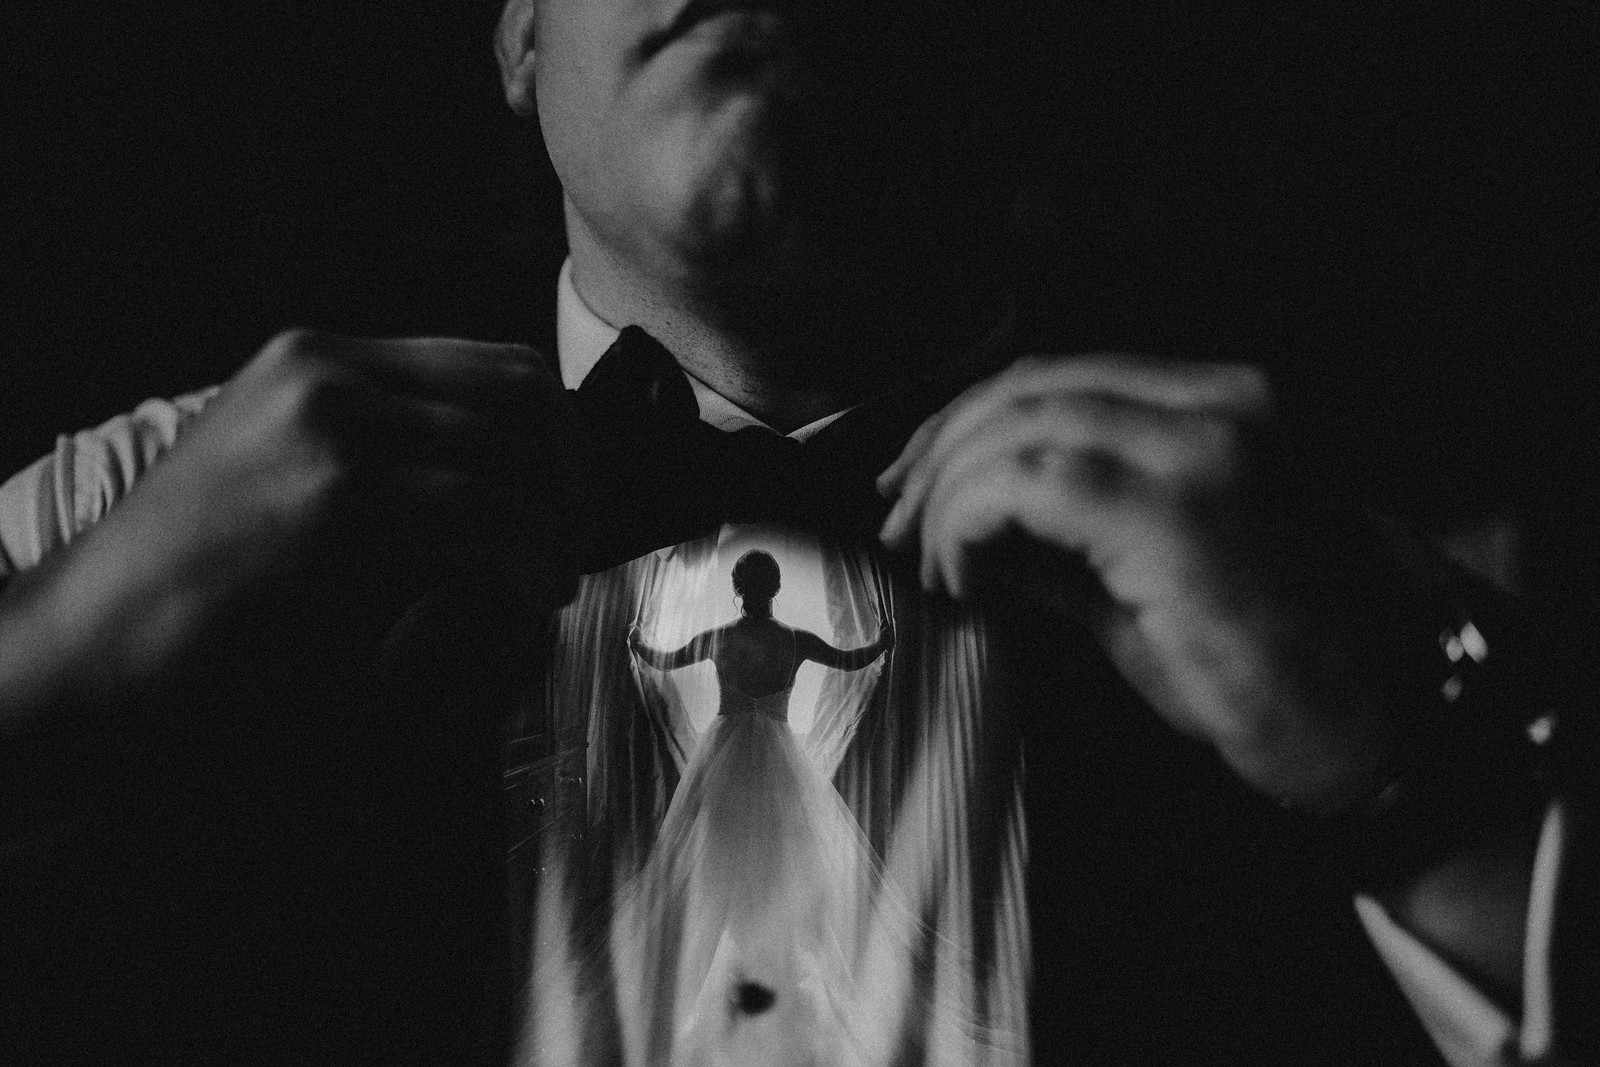 a reflection of the bride opening curtains is reflected in the grooms shirt